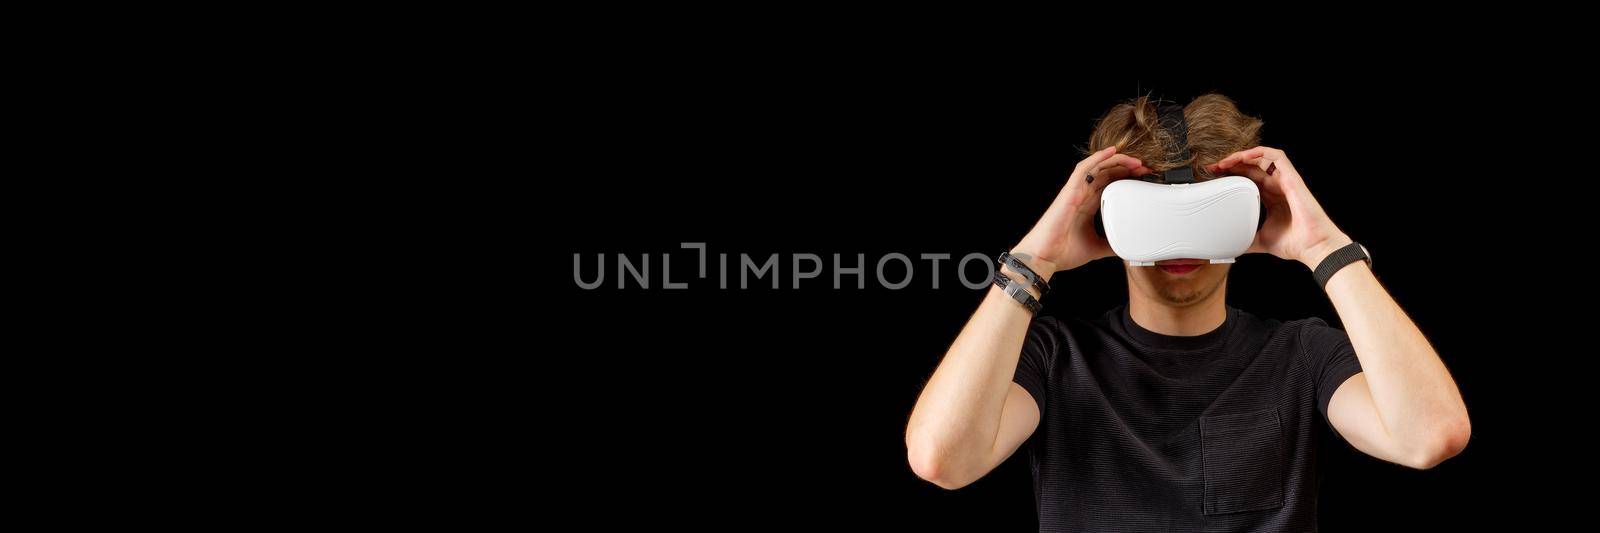 Portrait of a young man with 3D virtual reality glasses. Young man using white virtual reality headset, VR, future, goggles, technology concept on black background.